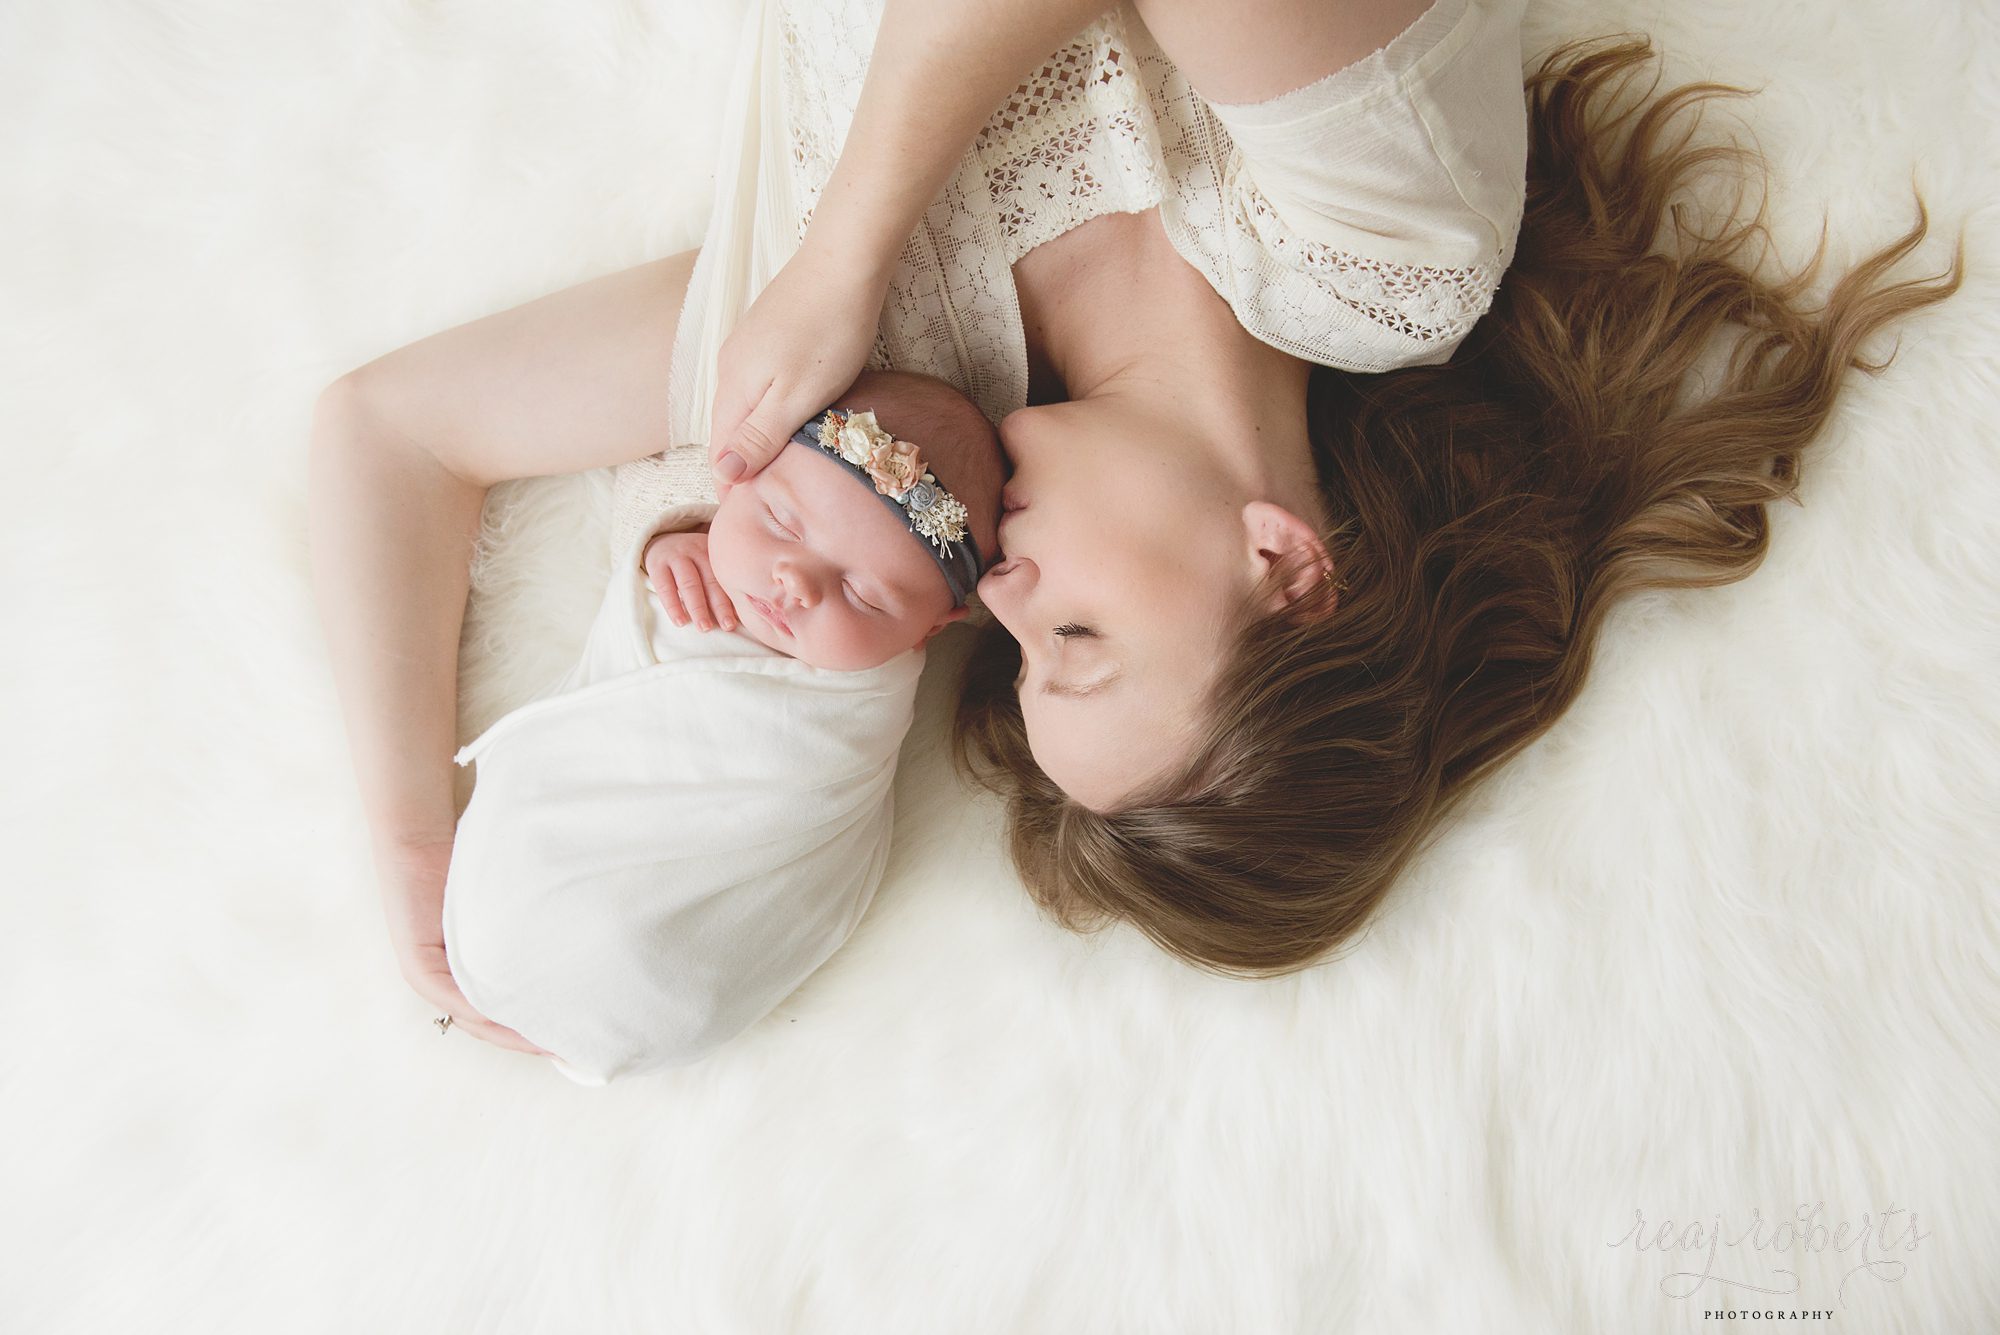 Newborn baby girl with mother | Reaj Roberts Photography